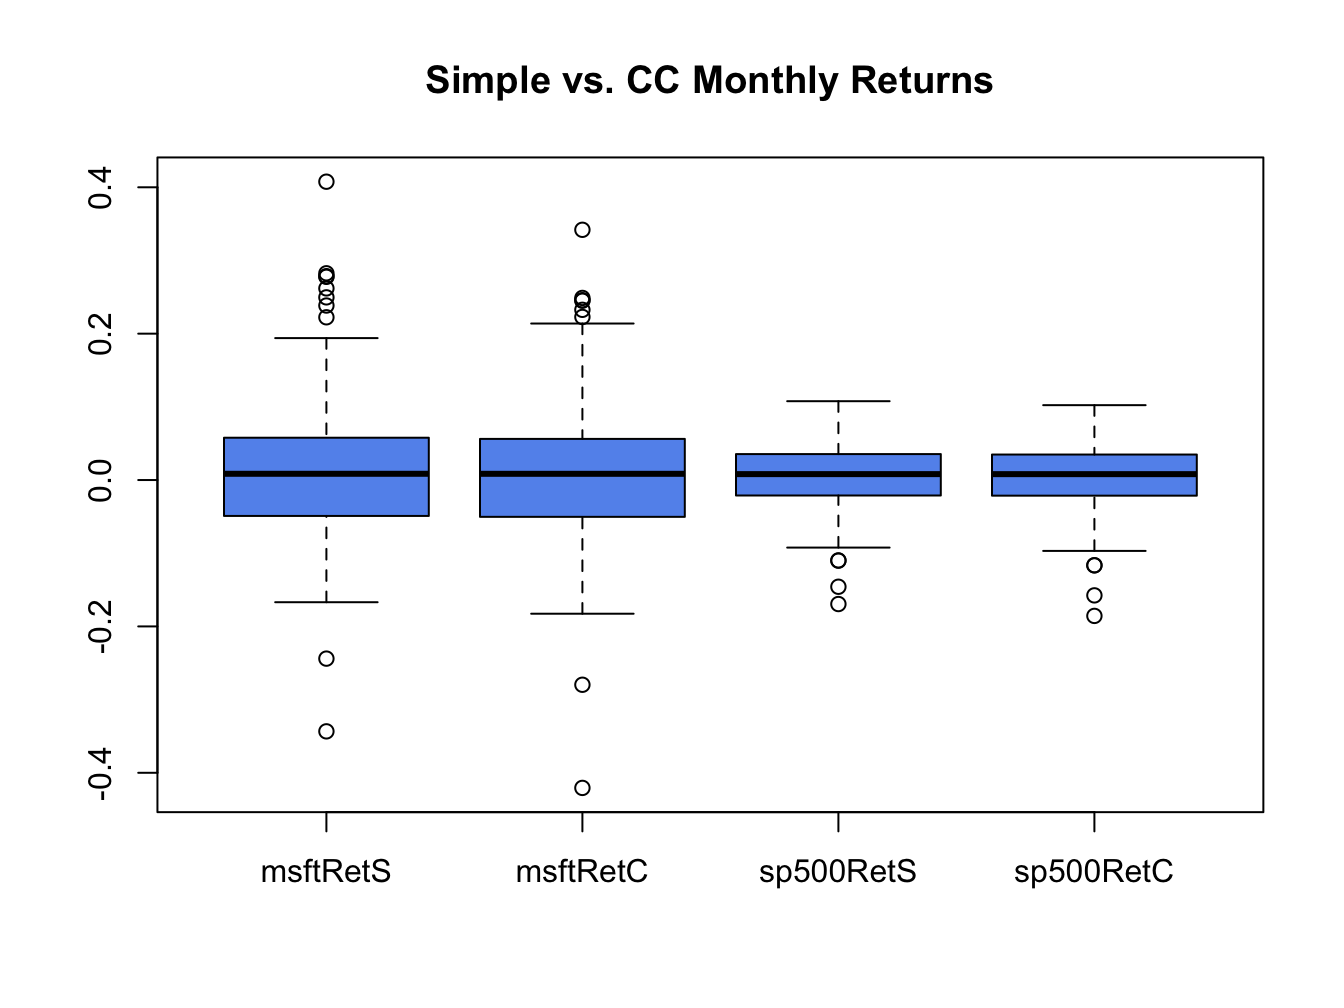 Boxplots of the continuously compounded and simple monthly returns on Microsoft stock and the S\&P 500 index.